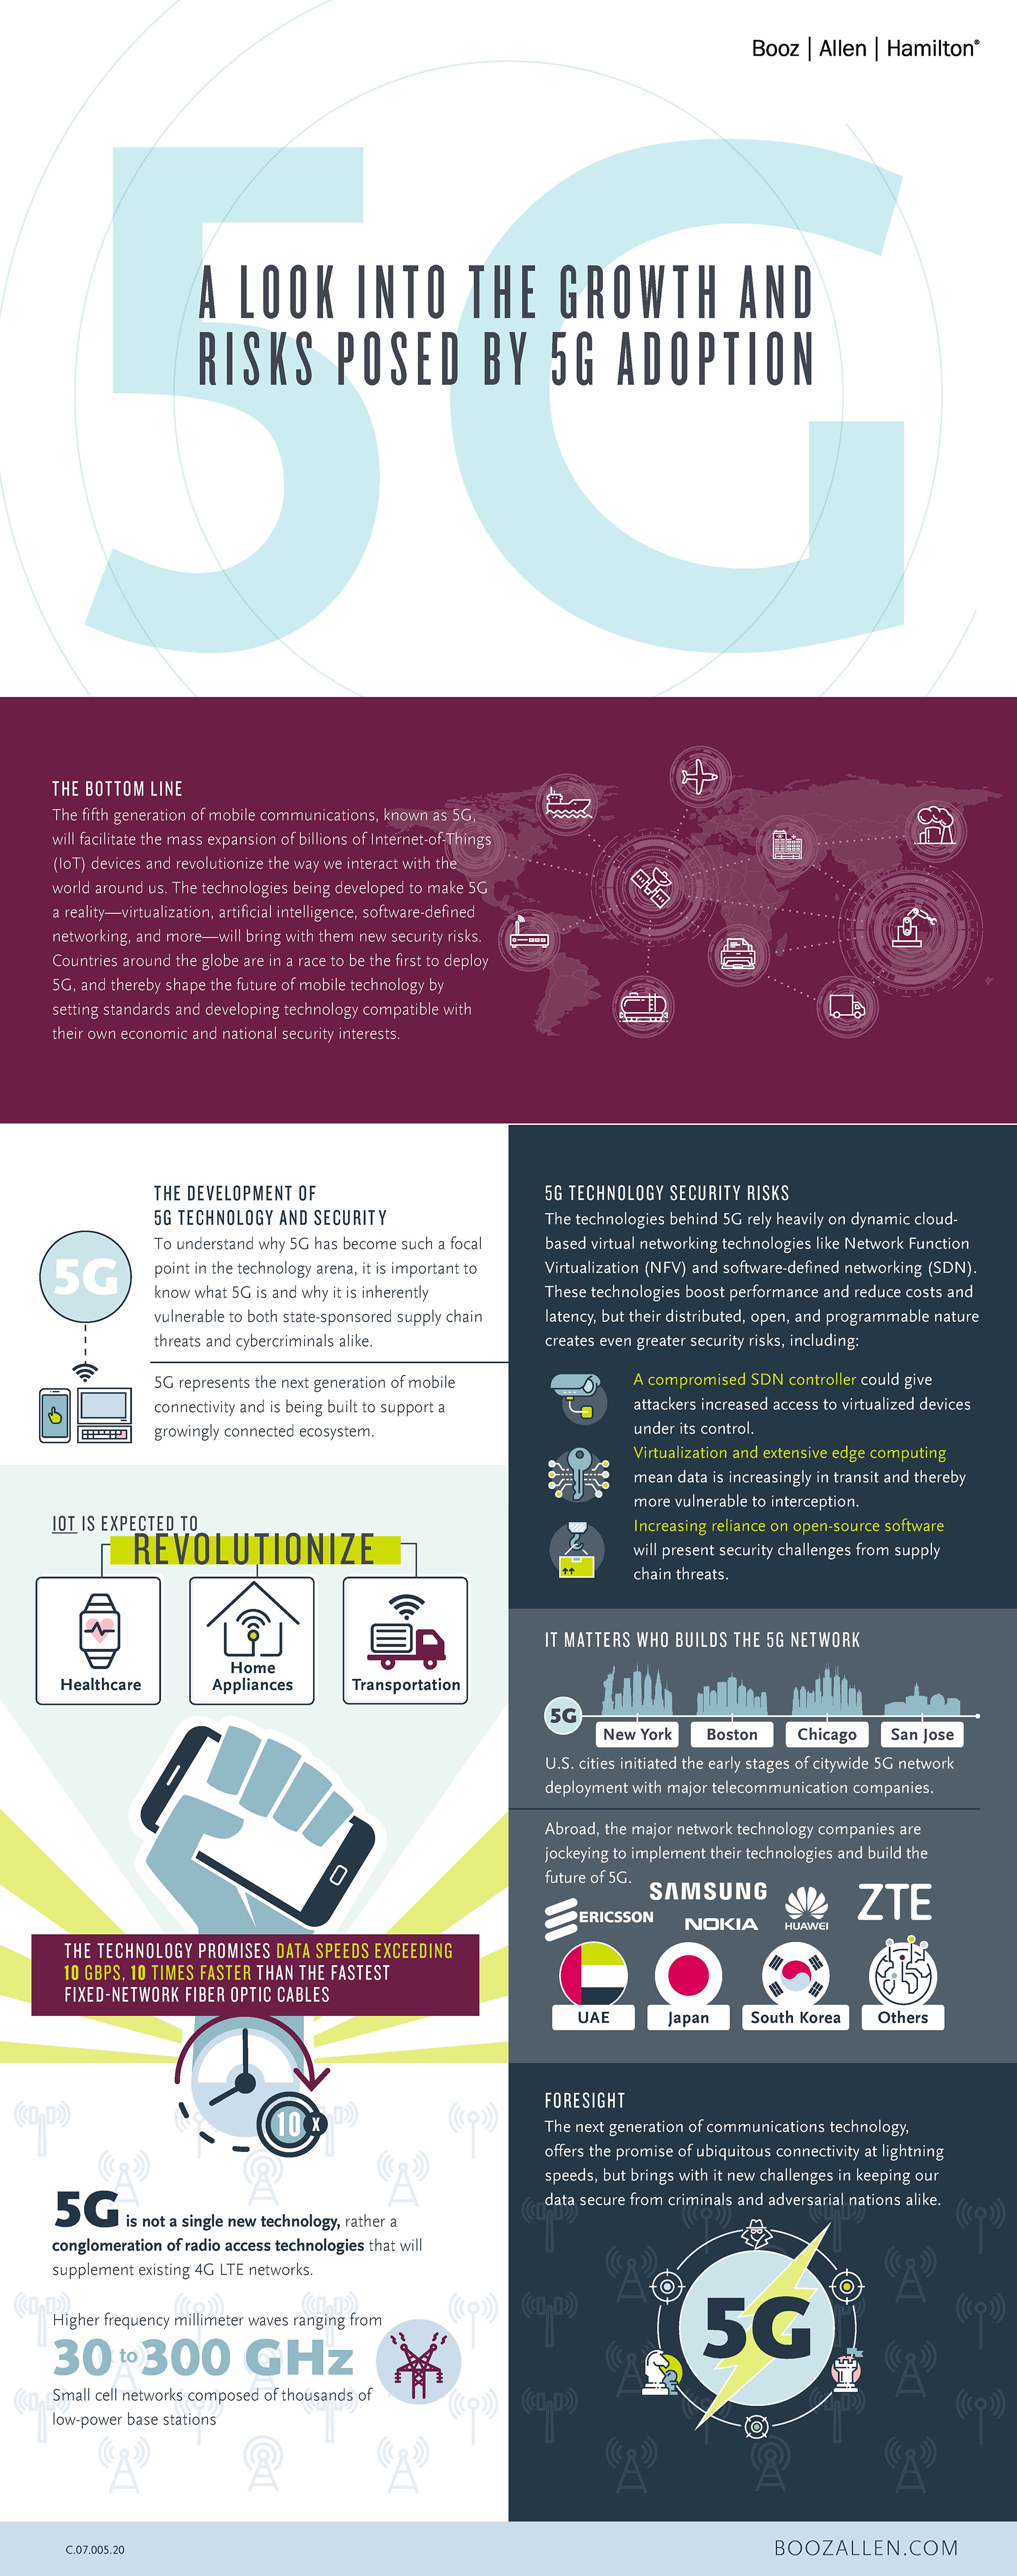 An infographic of the growth and risks posed by 5G adoption.